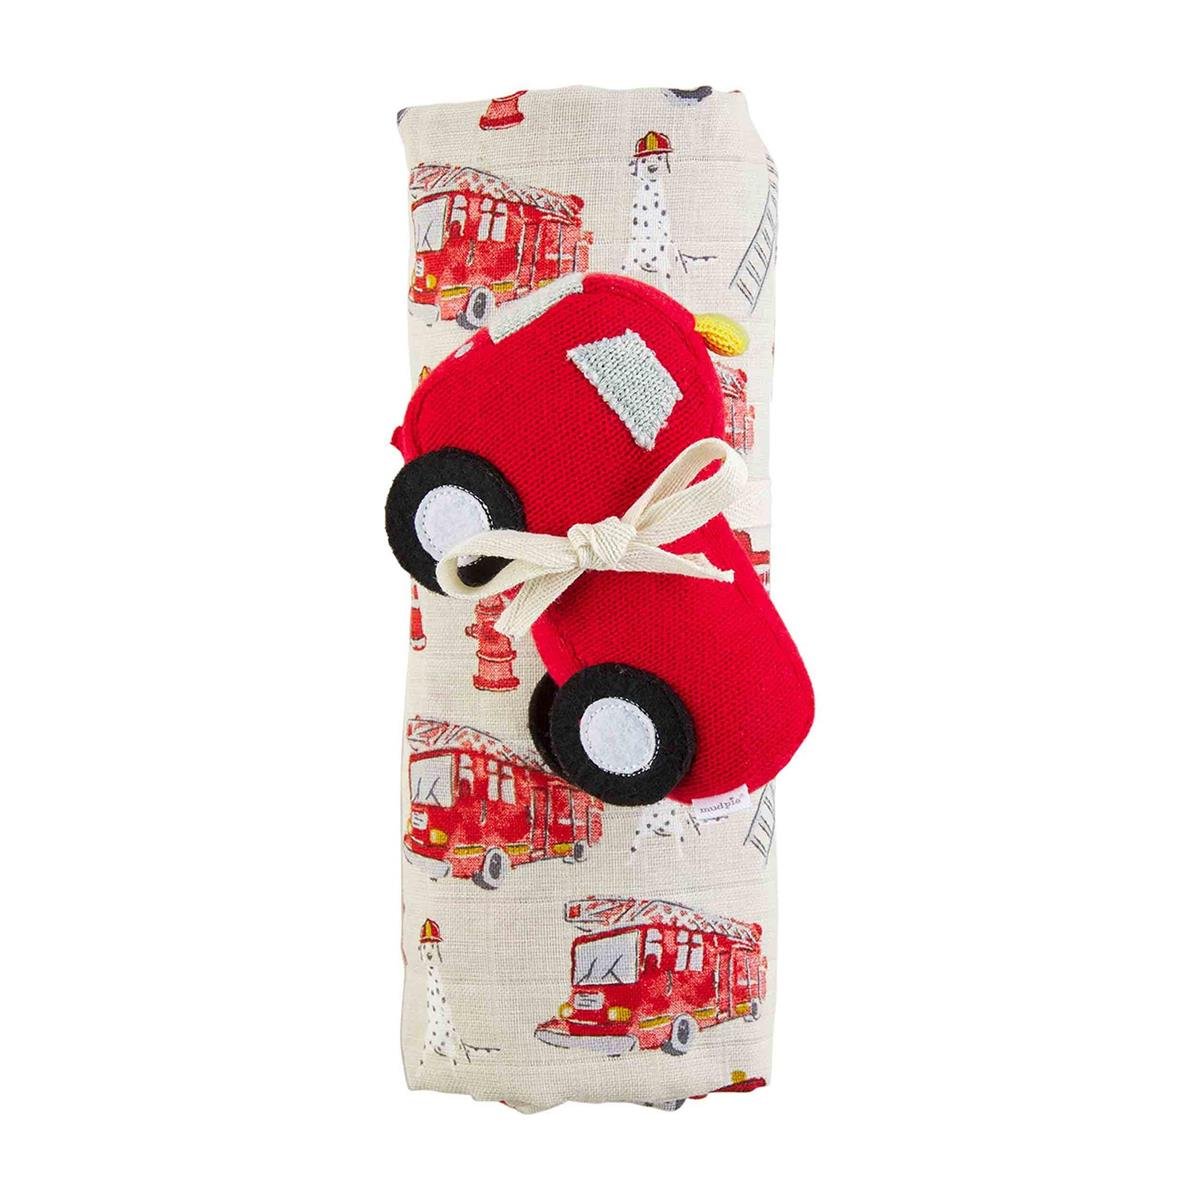 Fire Truck Swaddle & Rattle - Baby Blossom Company